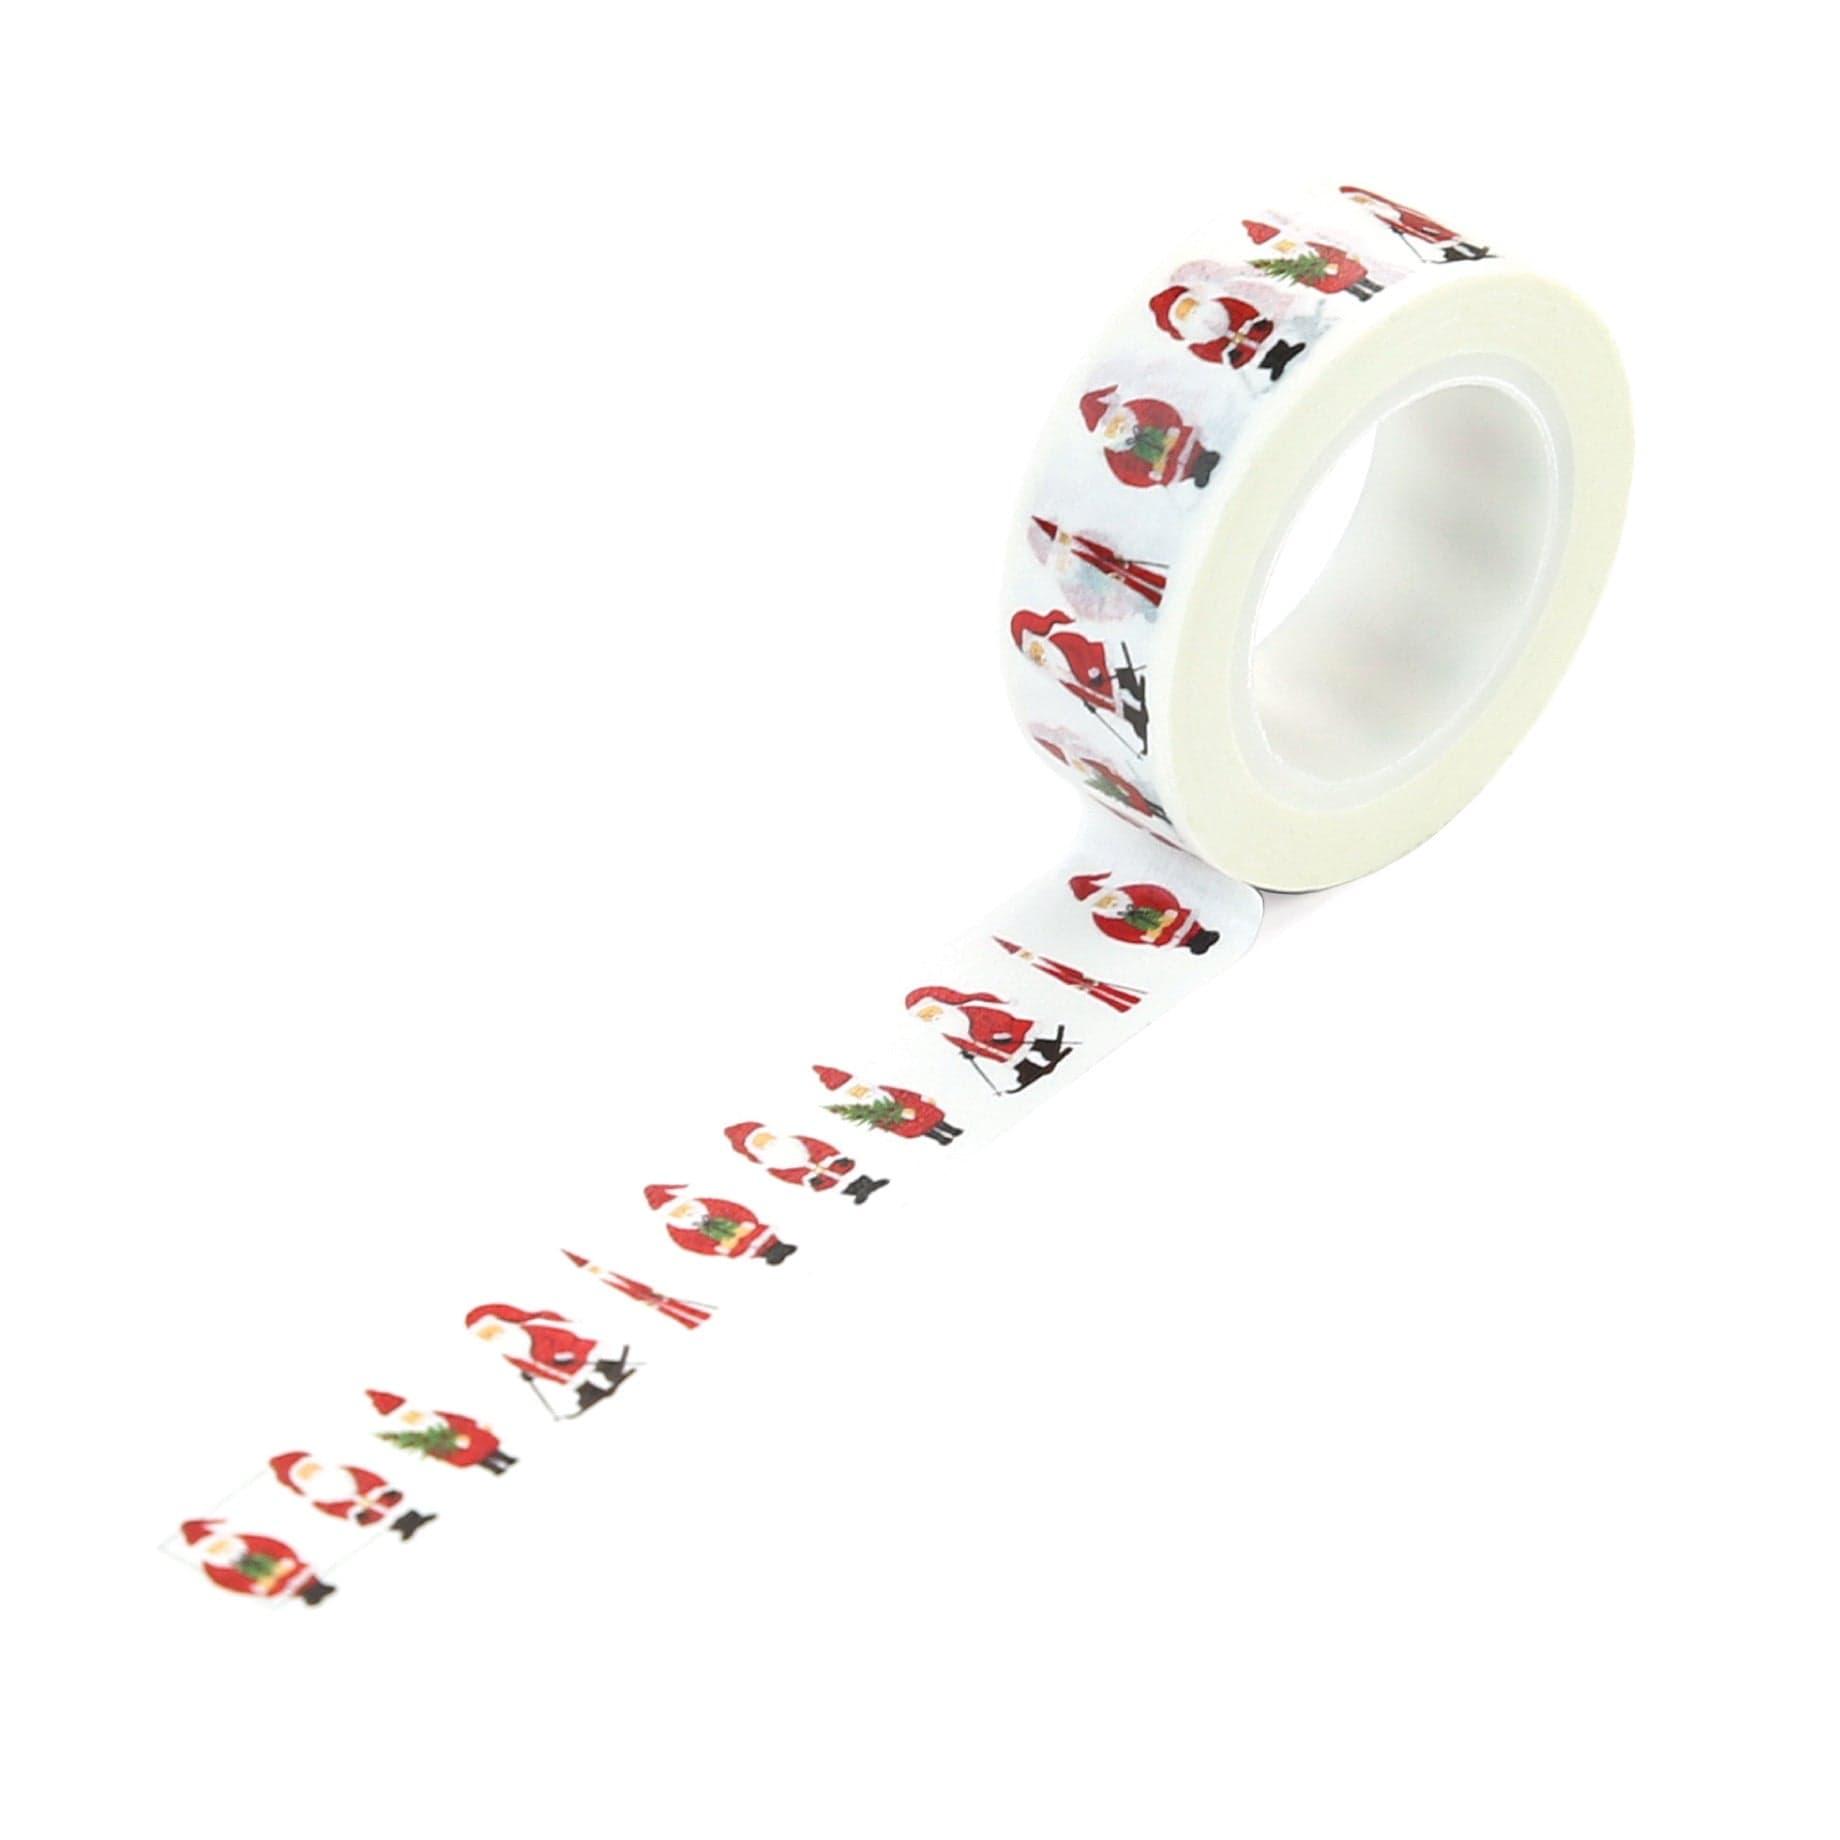 Here Comes Santa Claus Collection Santa Claus Washi Tape by Echo Park Paper - 30 Feet - Scrapbook Supply Companies